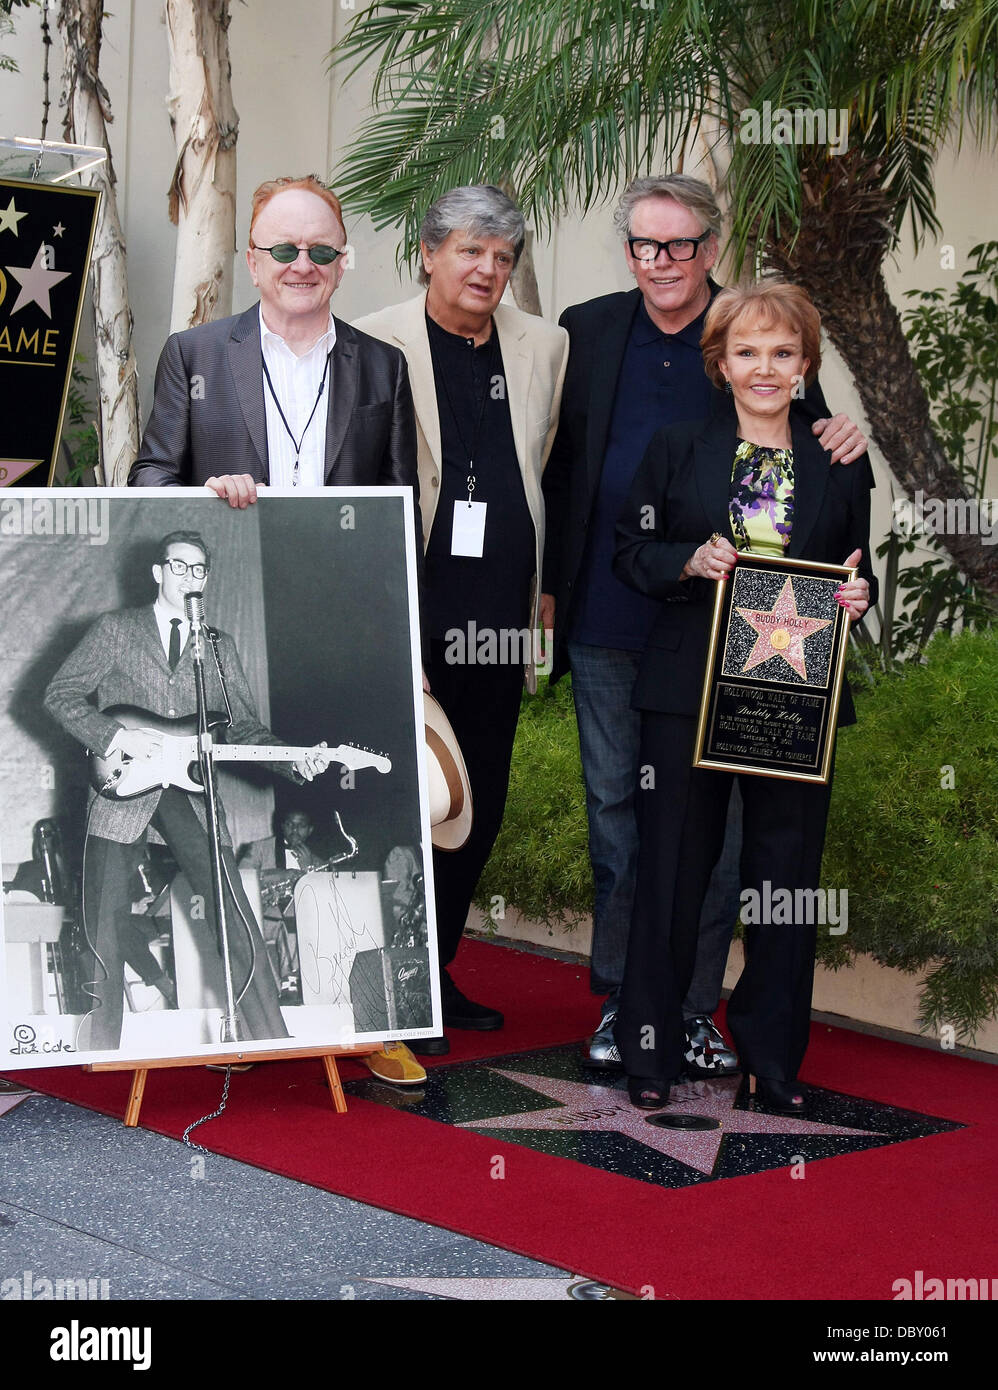 Peter Asher, Phil Everly, Gary Busey, Maria Elena Holly Buddy Holly Star Unveiling On The Hollywood Walk Of Fame Held In Front of Capital Records Hollywood, California - 07.09.11 Stock Photo